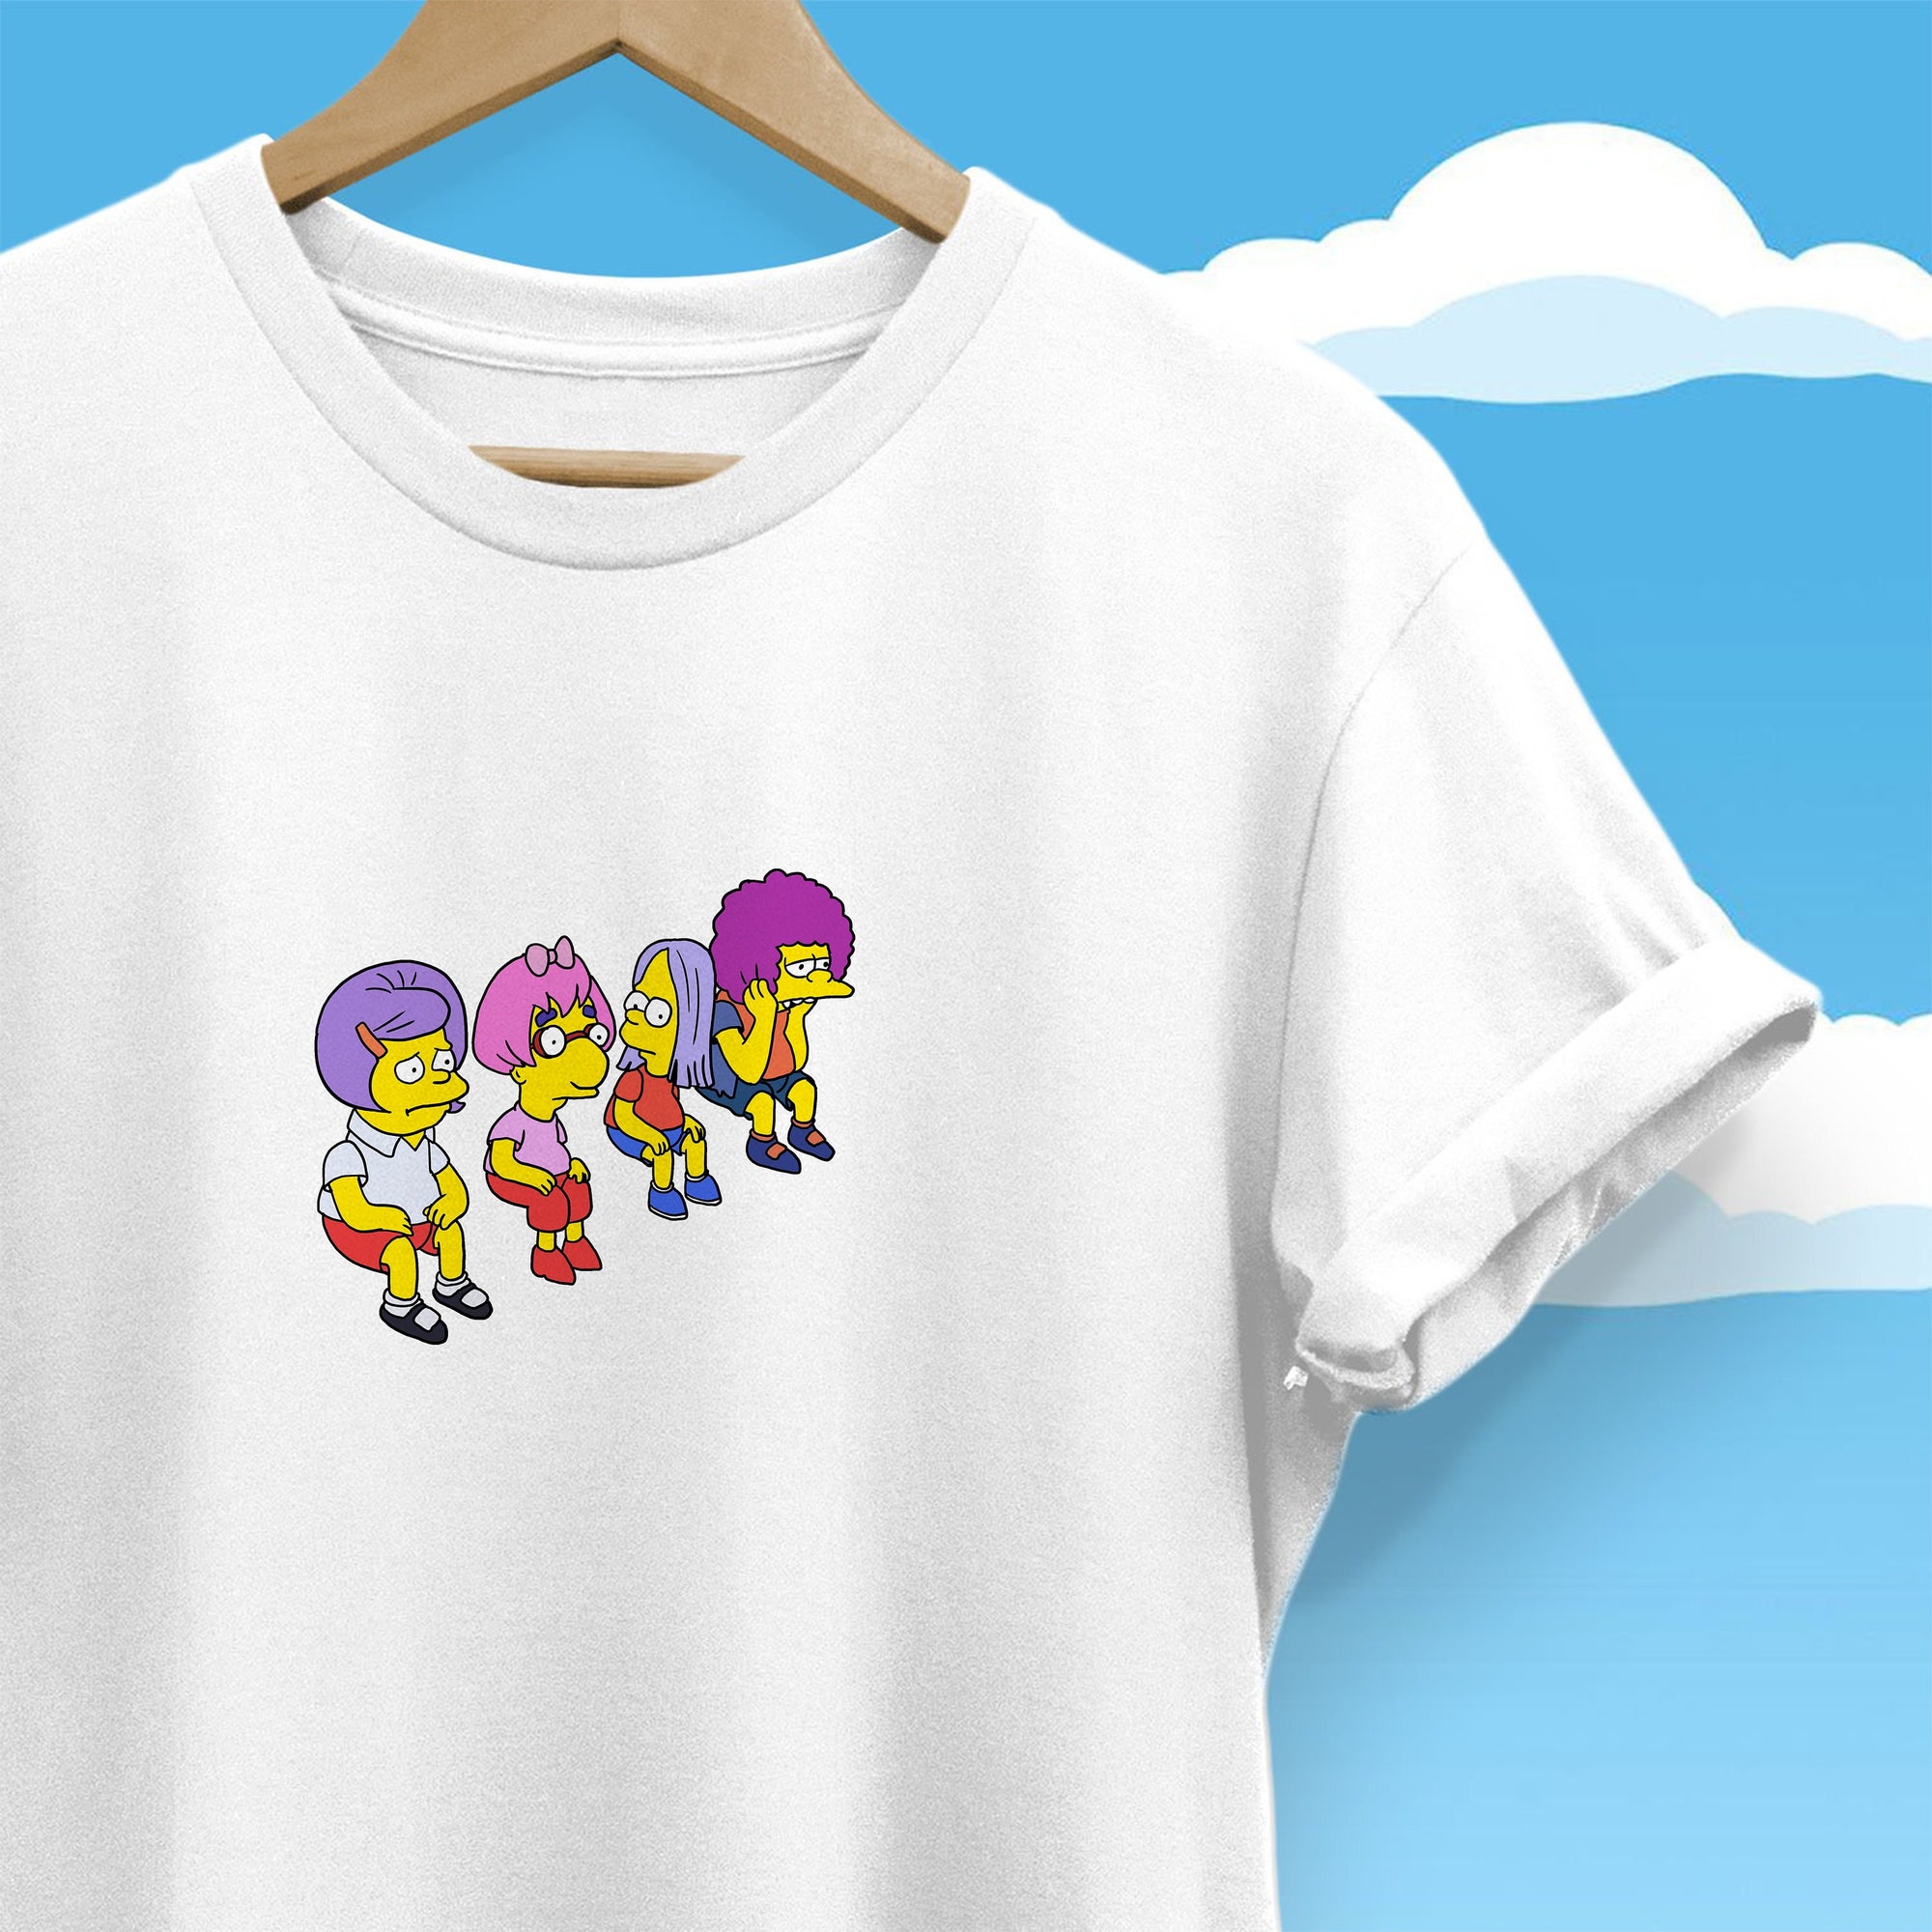 Discover The Simpsons Themed - shirt 'Wigs' fan Unisex Softstyle T-Shirt